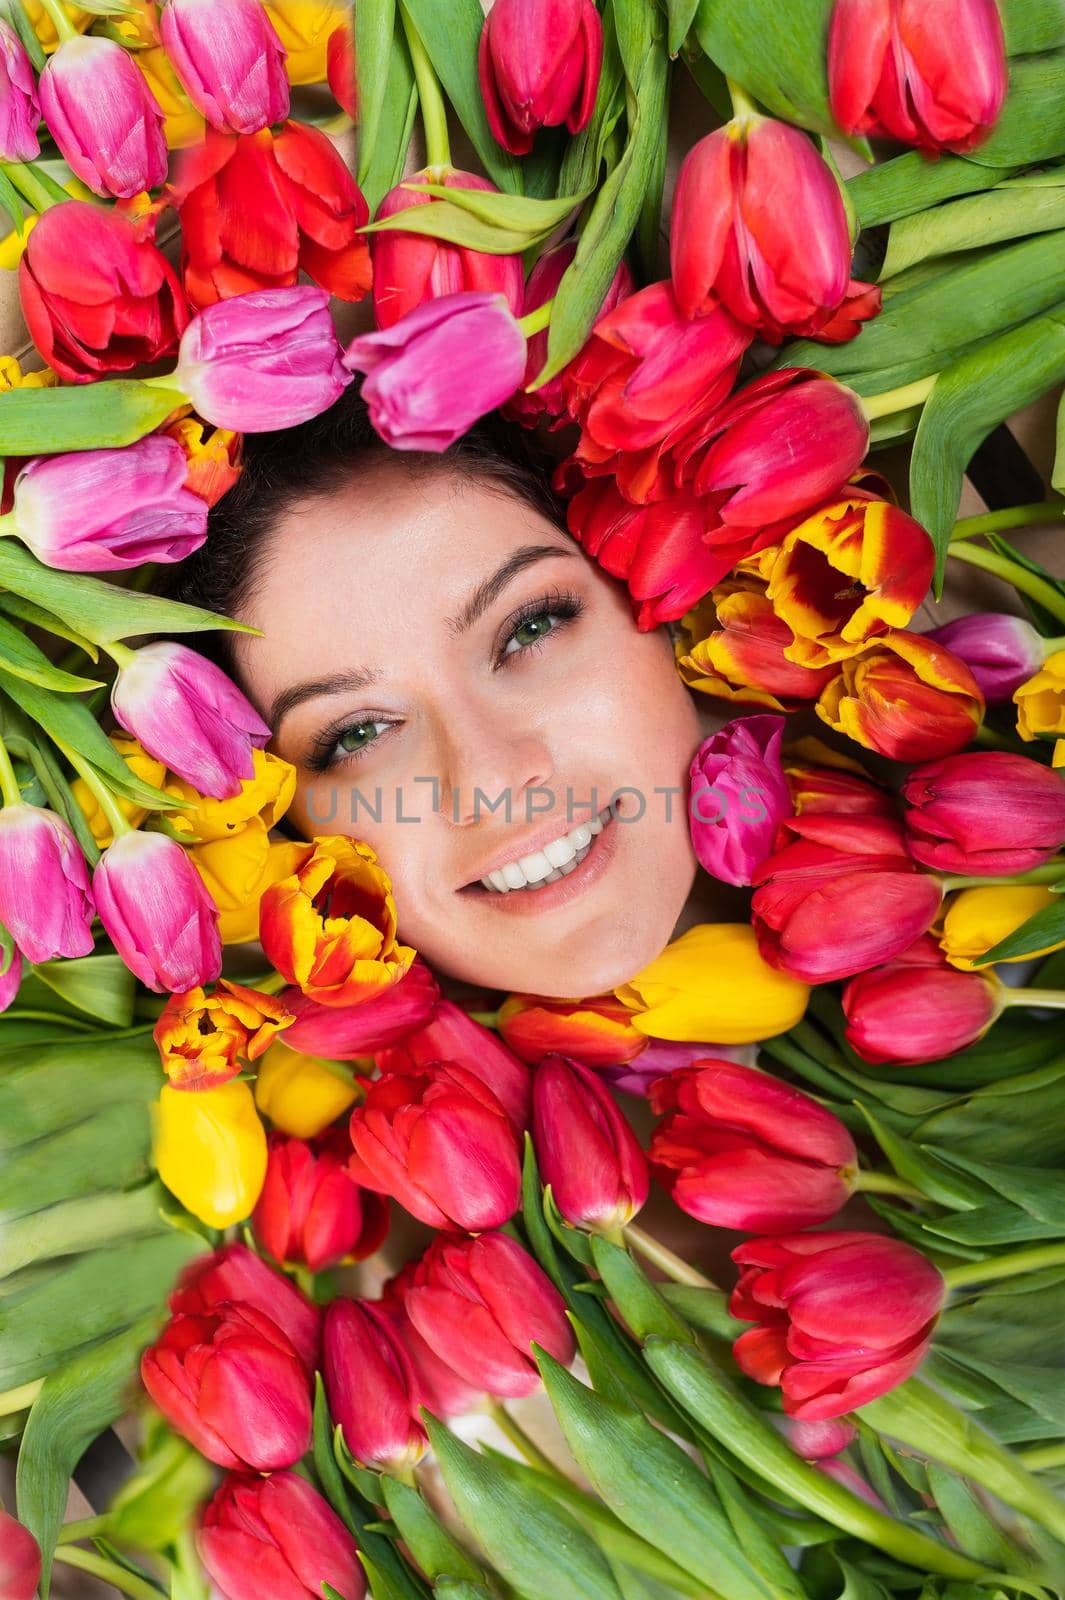 Portrait of a young beautiful woman with tulips around her face. The girl lies in the flowers given for March 8th. International Women's Day. by mrwed54